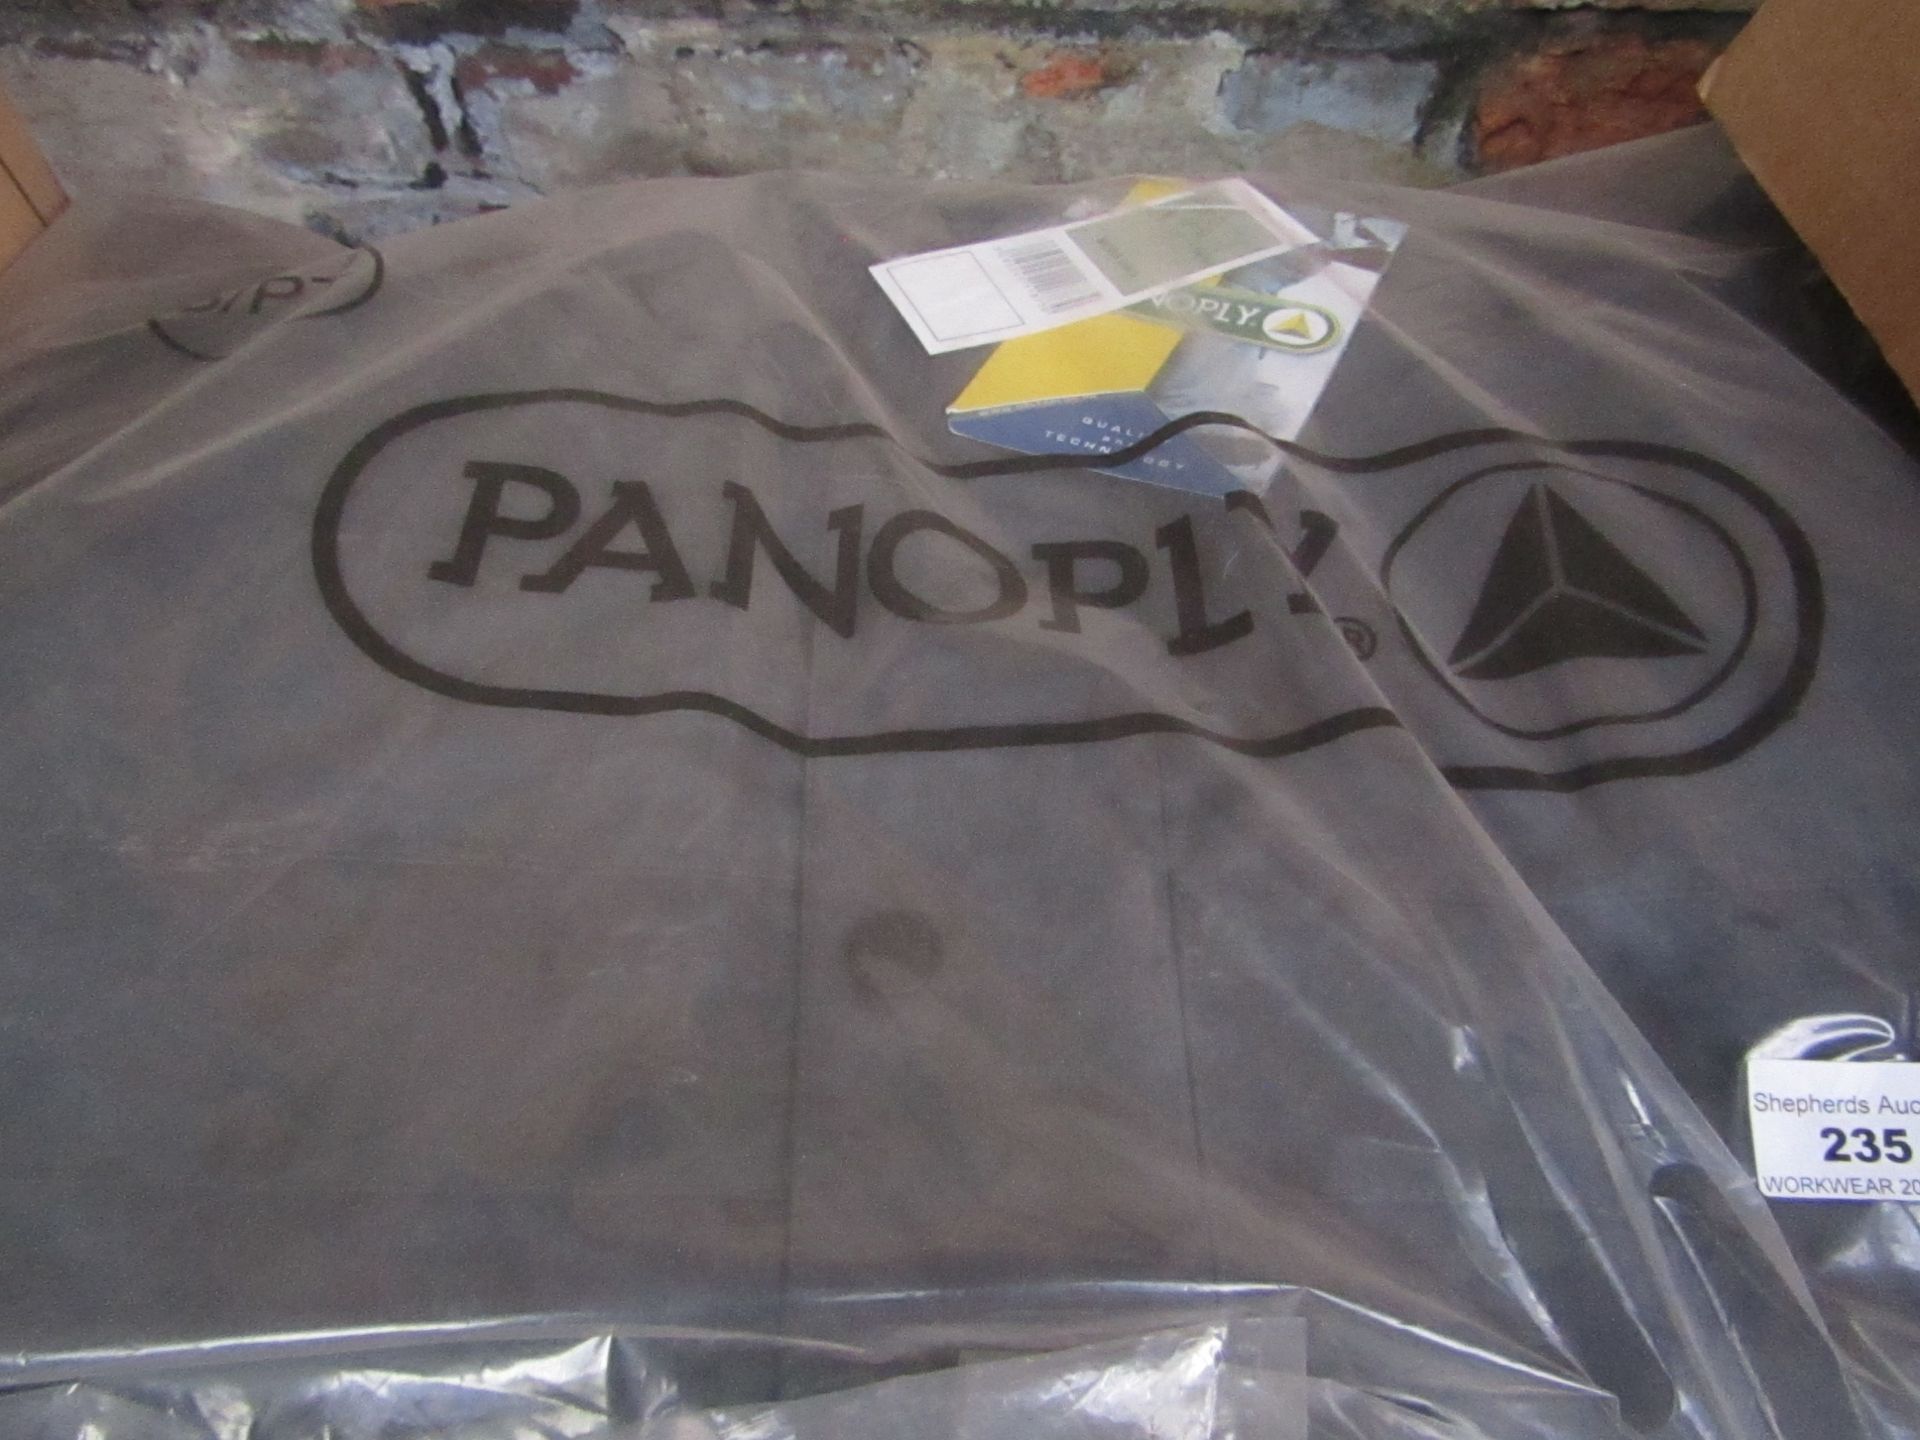 Panoply - Black Coat - Size Small - New & Packaged.